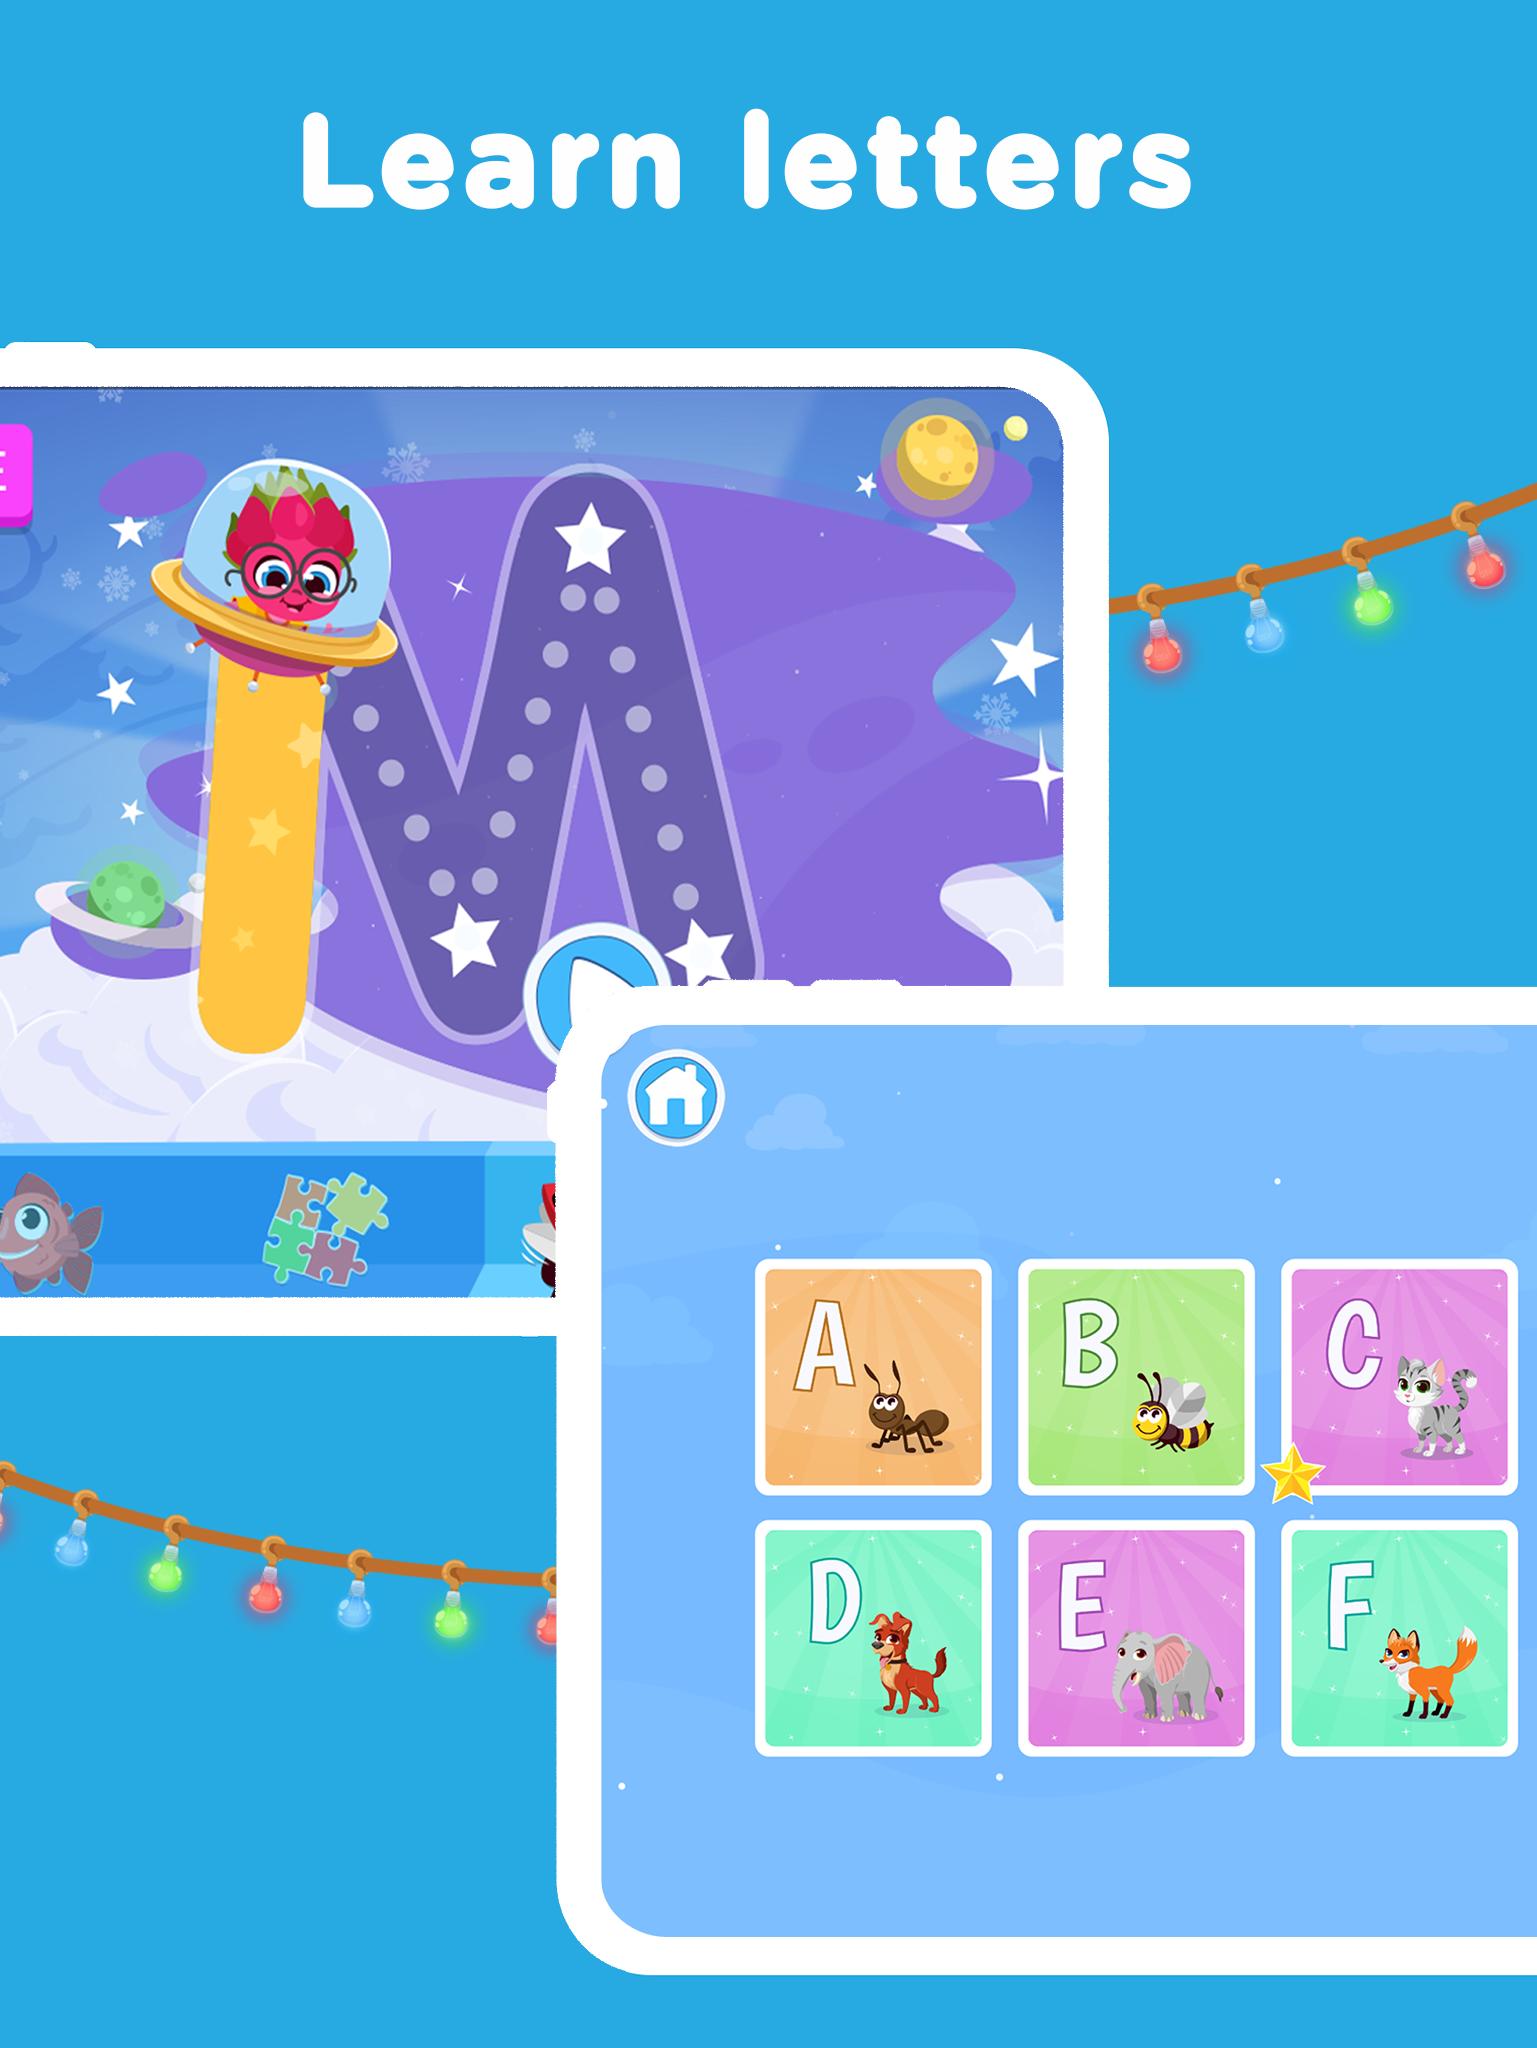 Keiki - ABC Letters Puzzle Games for Kids & Babies 1.9.1 Screenshot 19